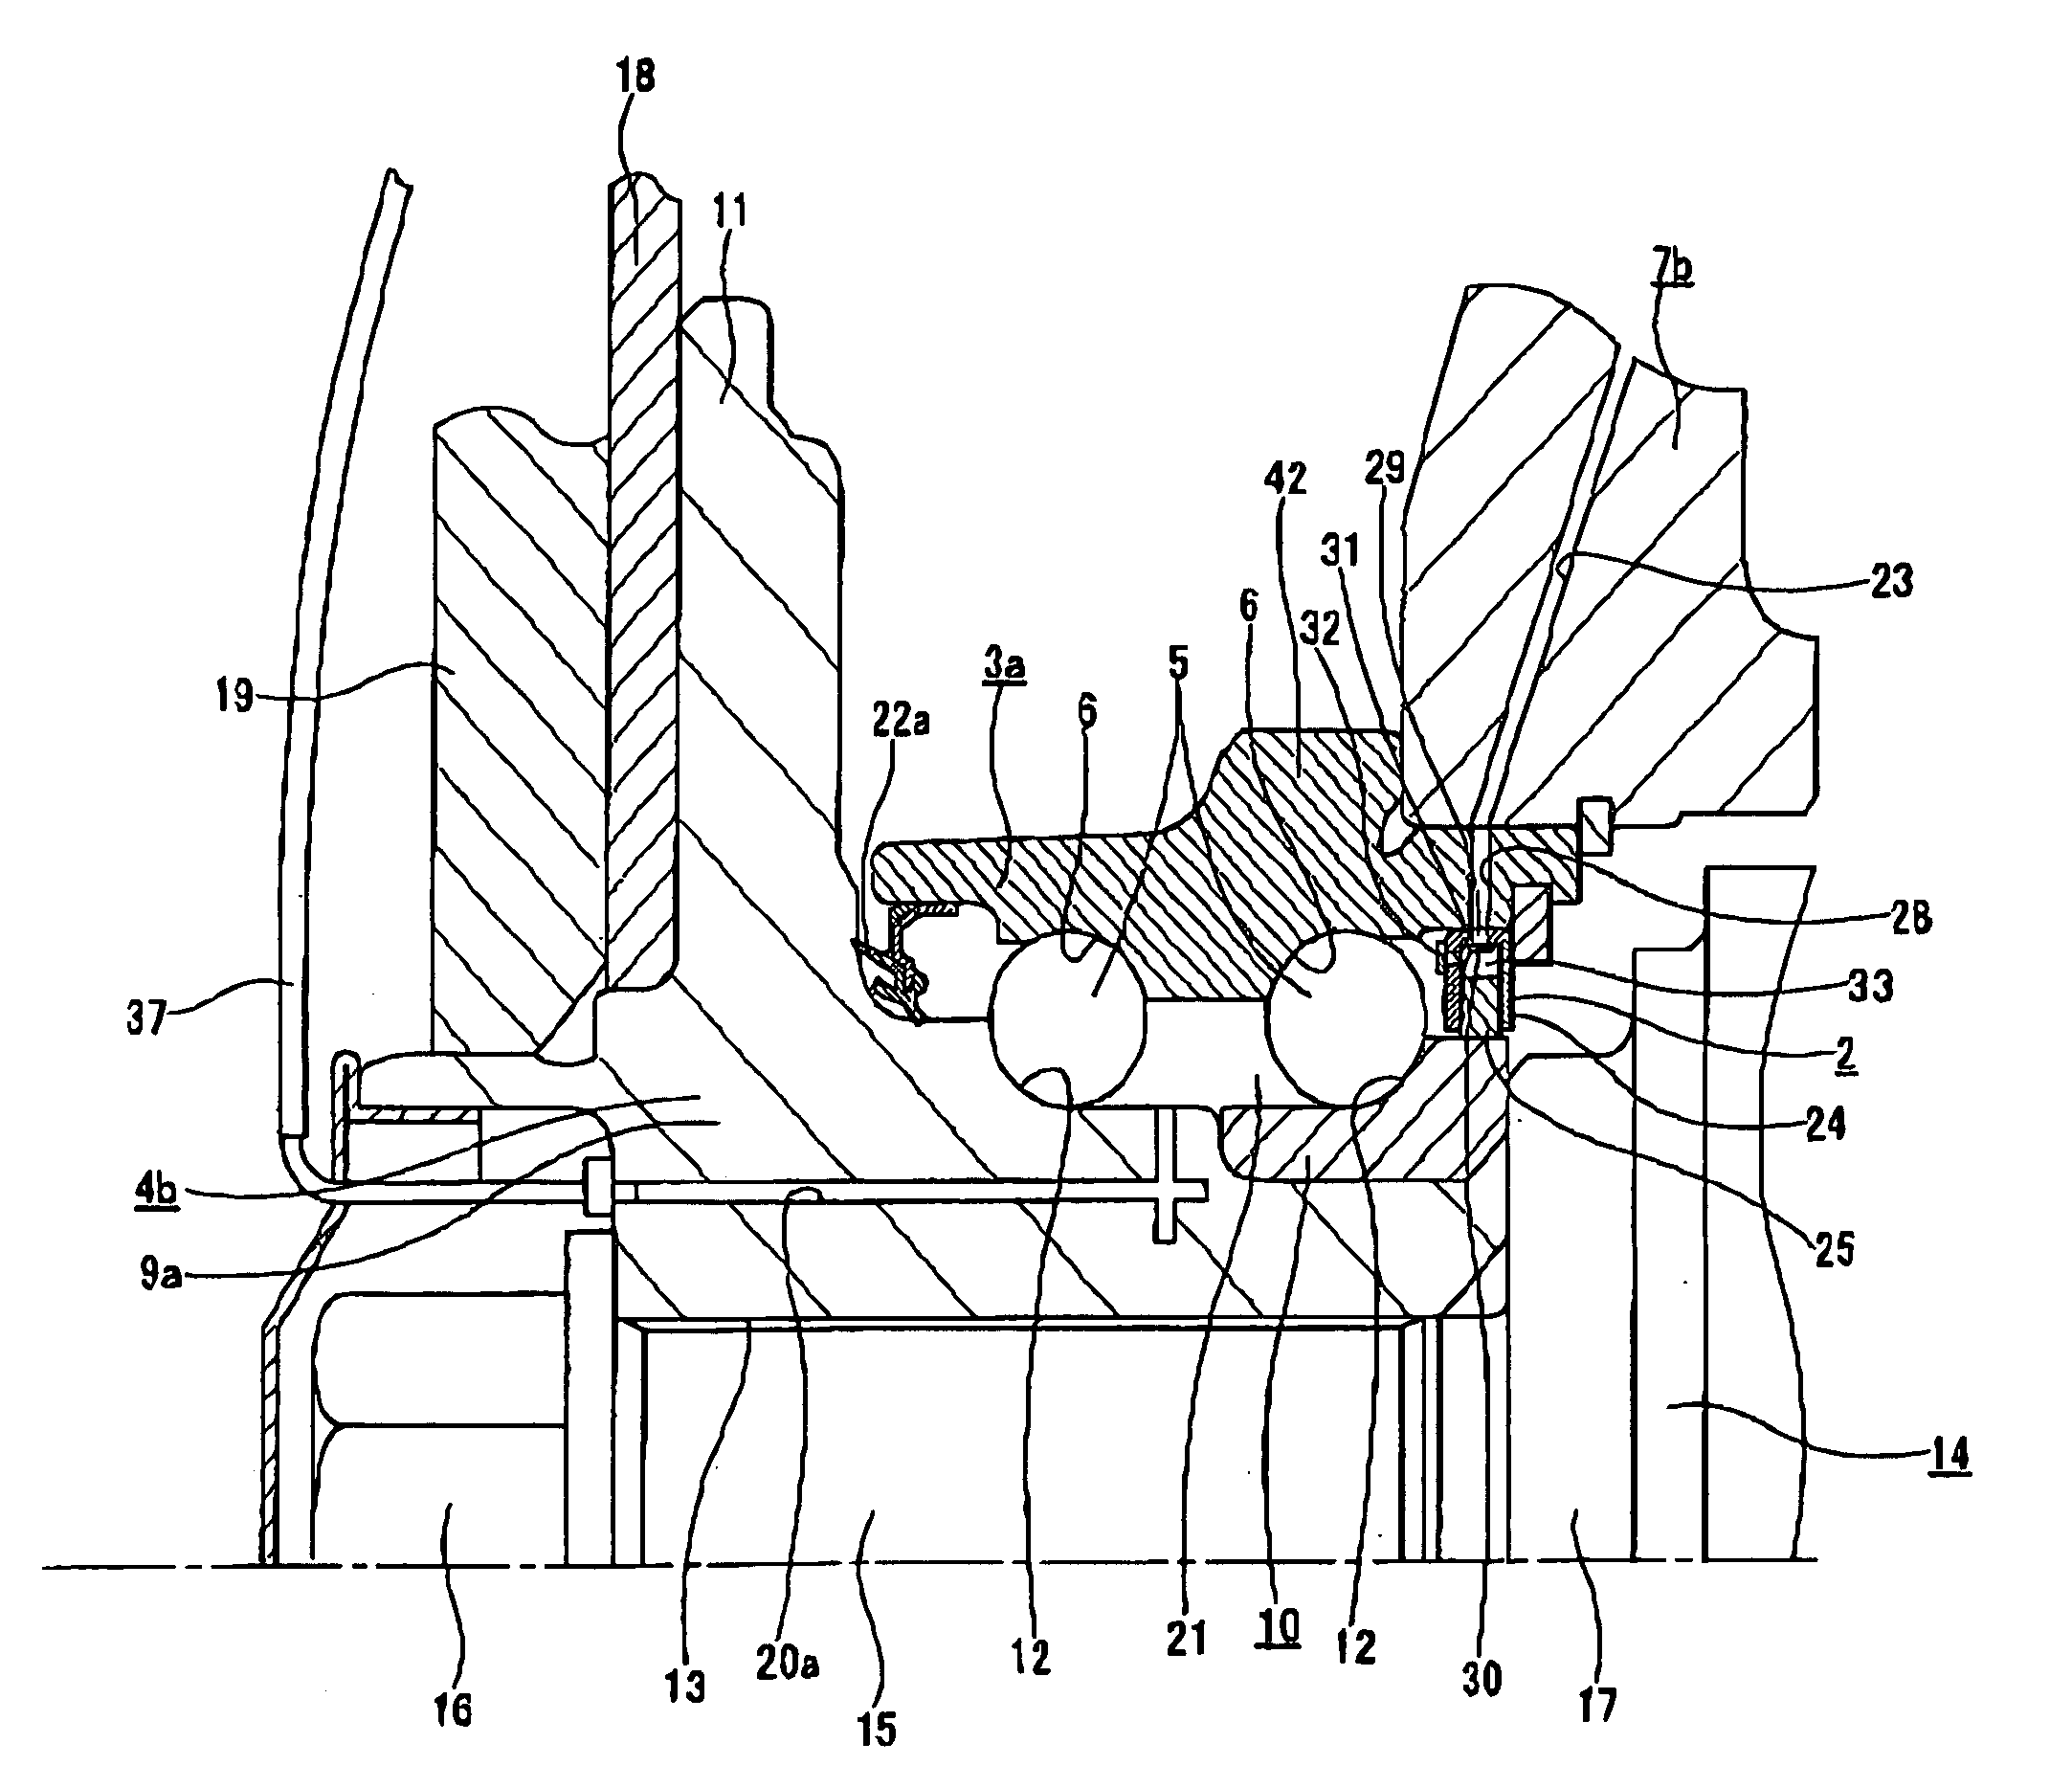 Rolling bearing unit for supporting a wheel with an air compressor